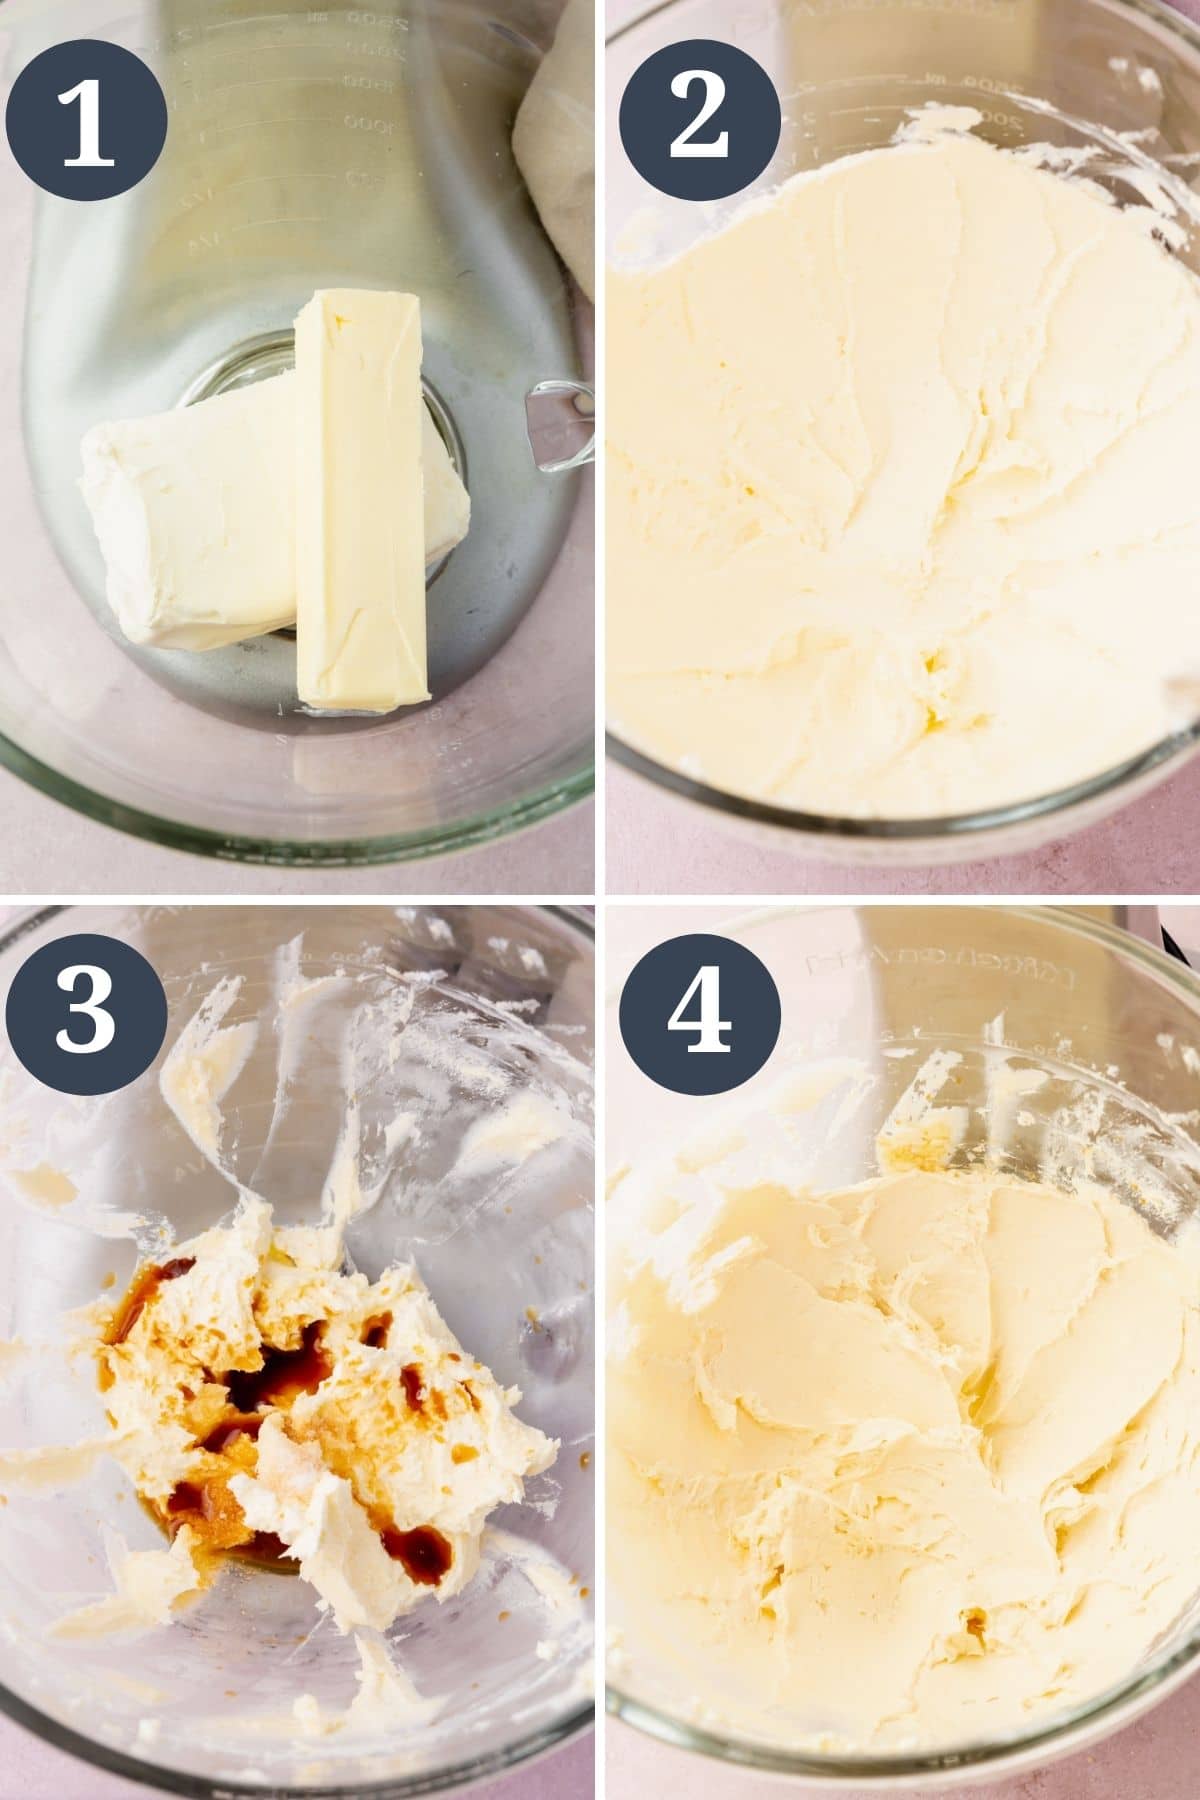 Steps 1-4 for making chocolate cream cheese frosting.